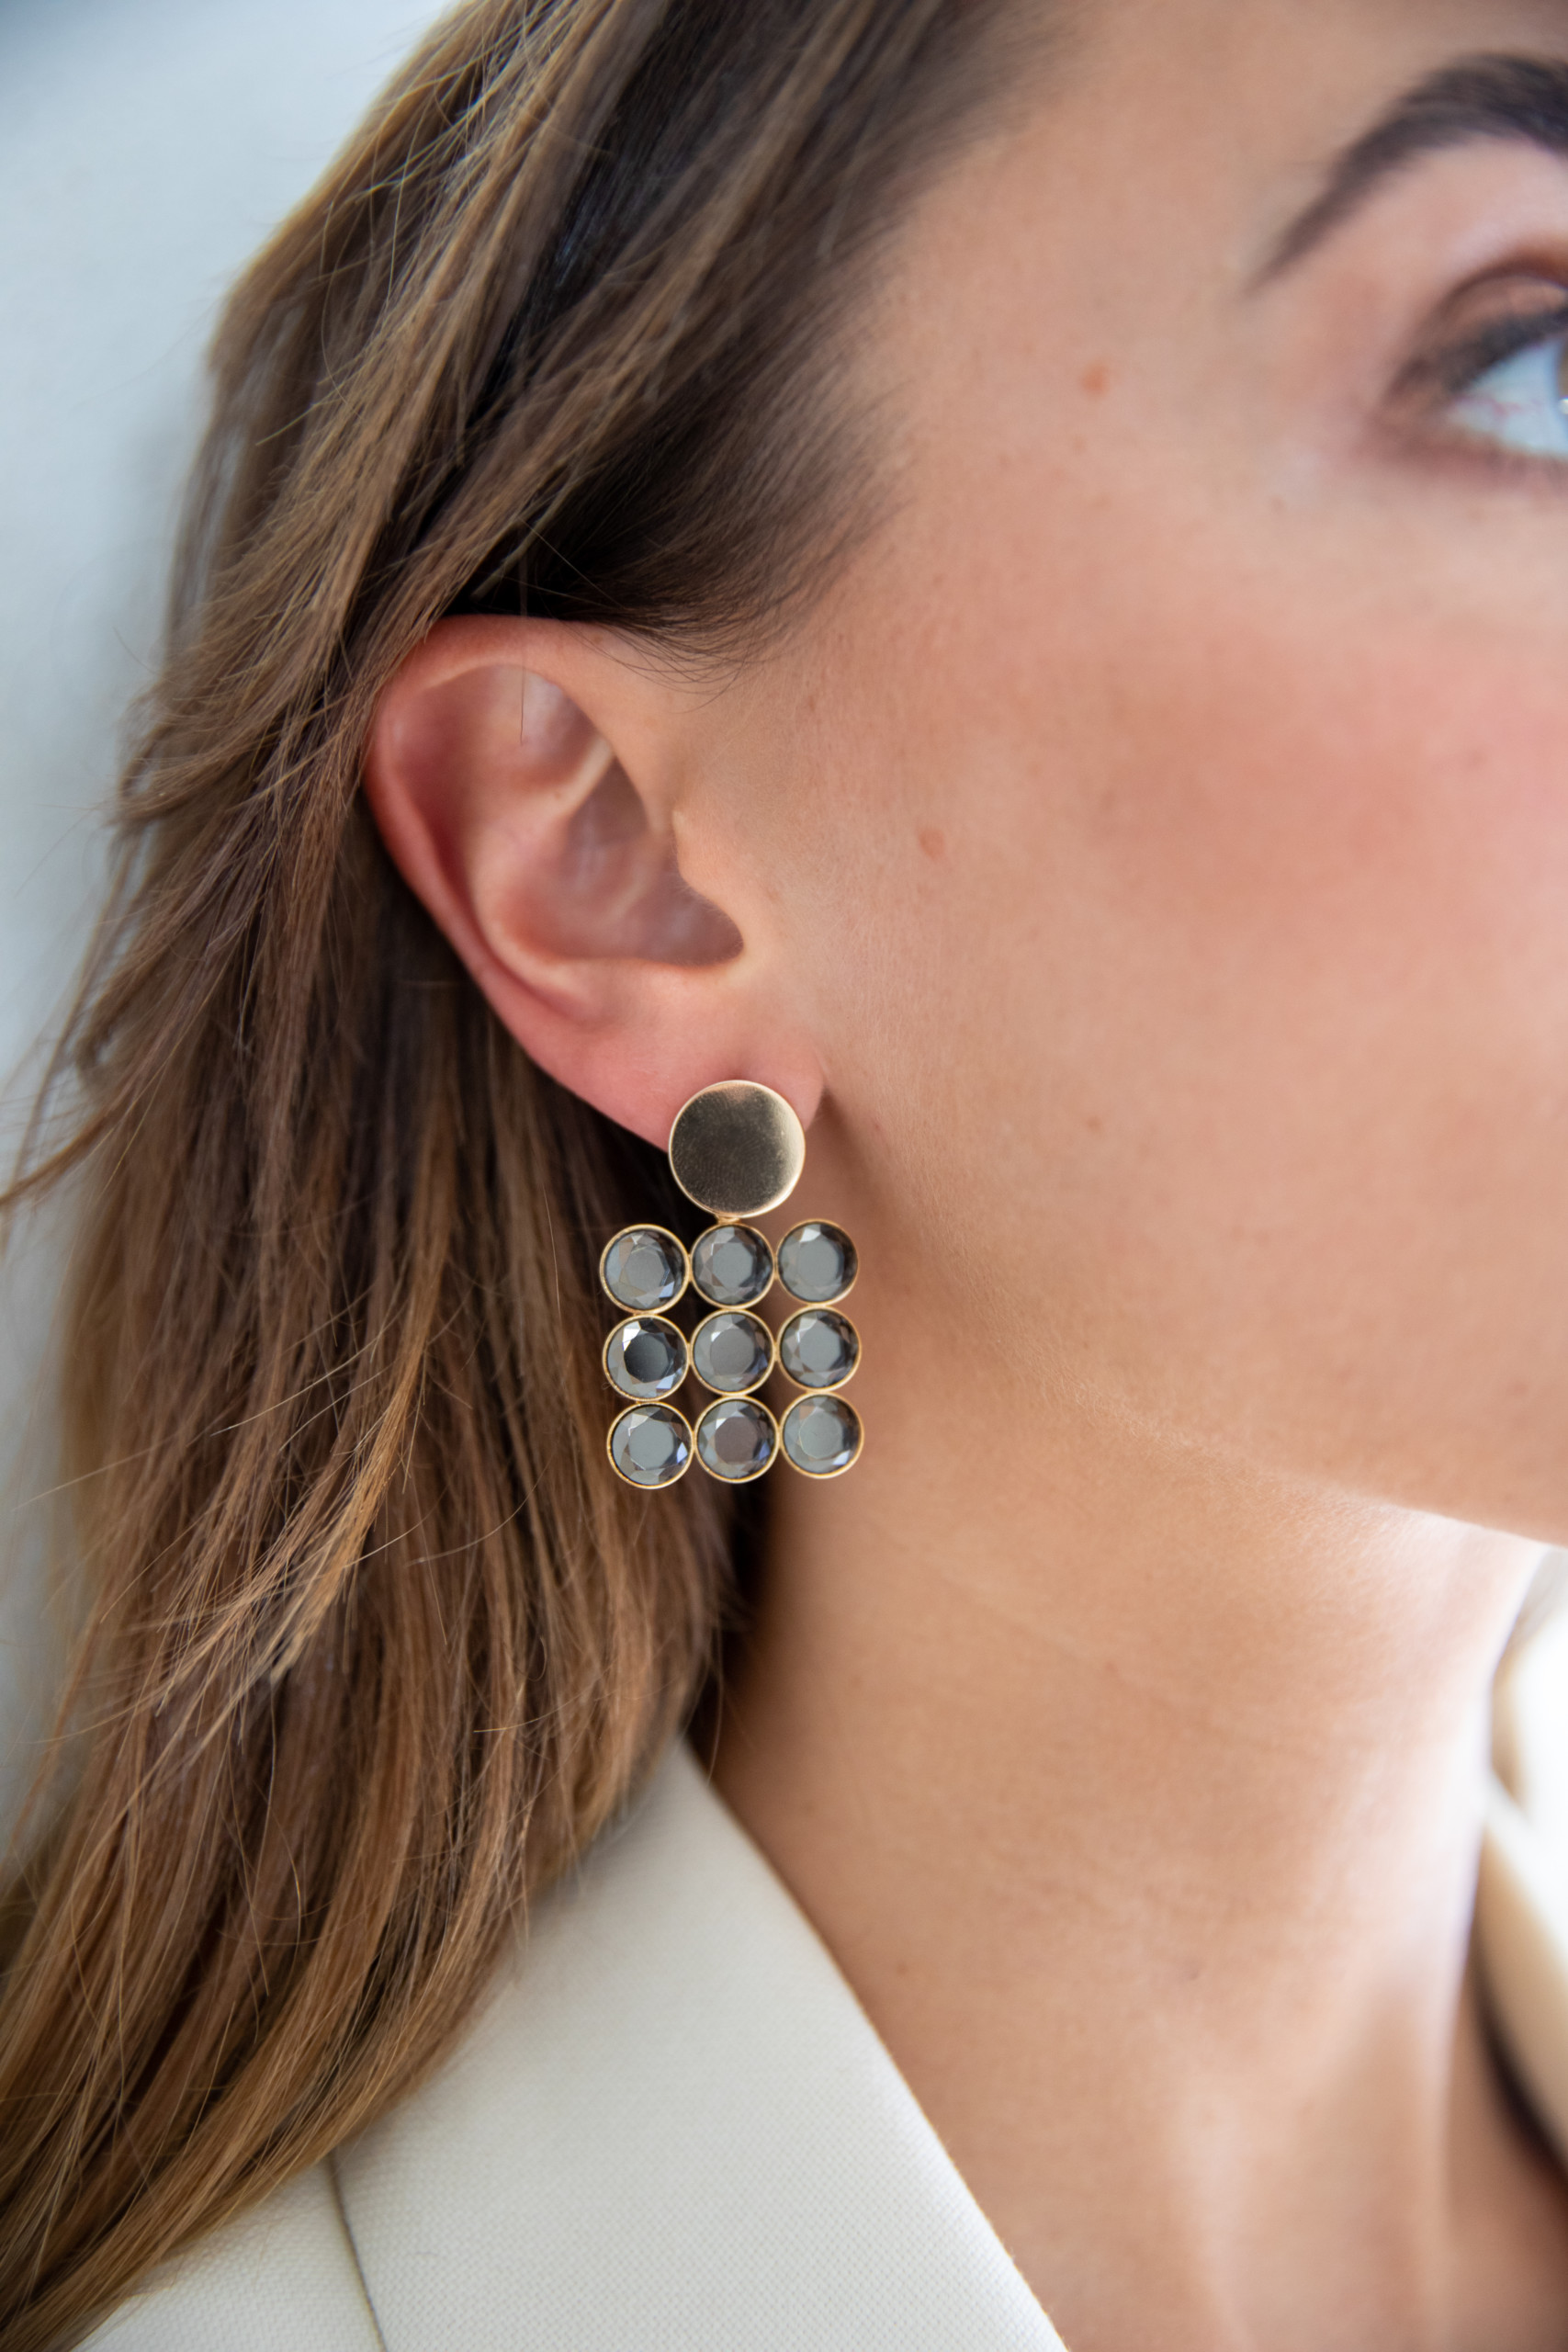 Stella anthracite mix earrings